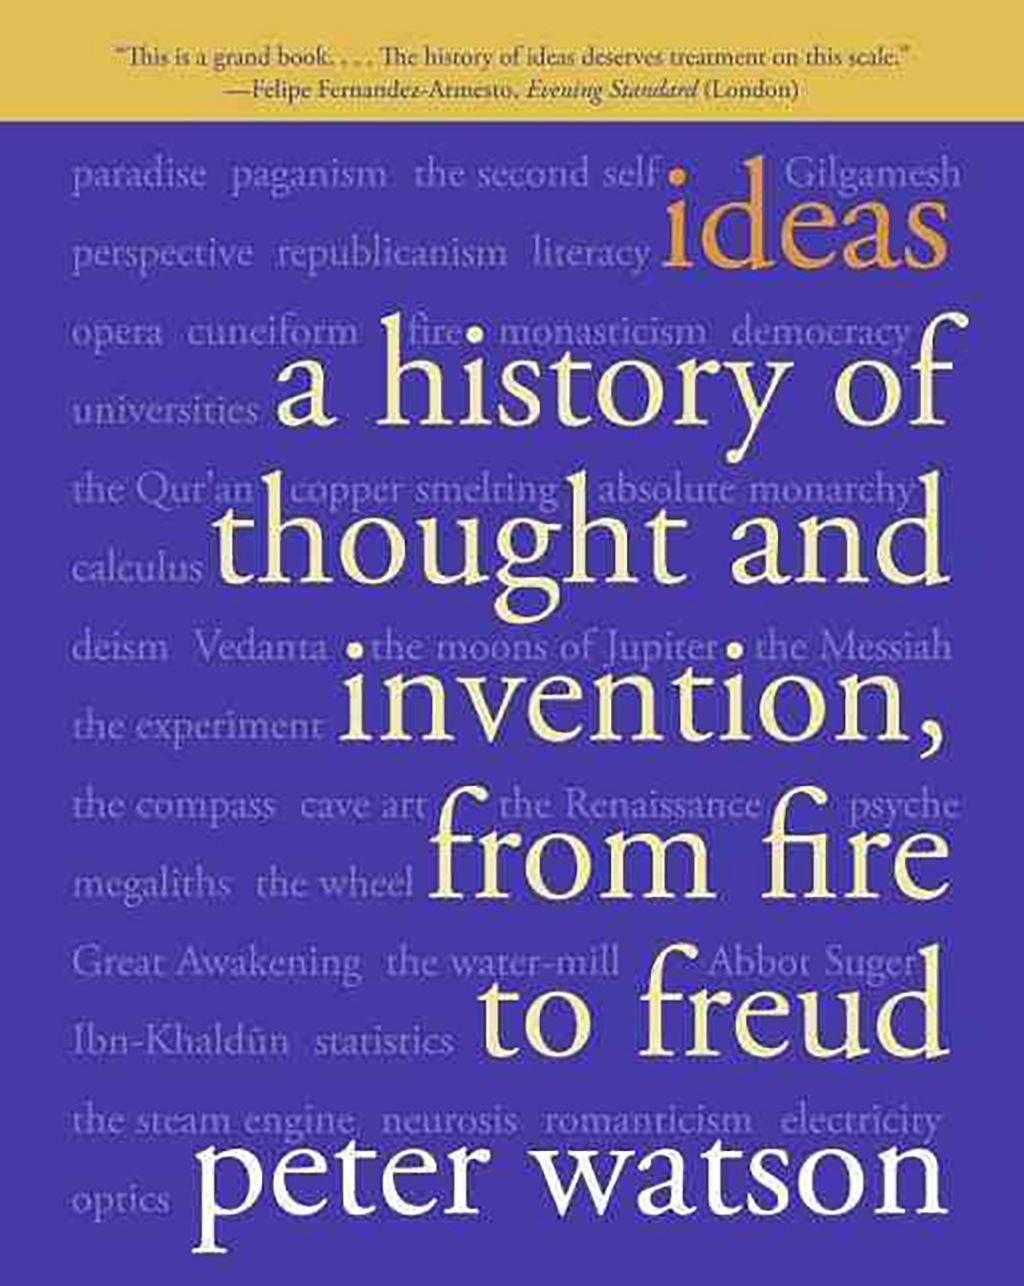 a history of thought and invention from fire to freud, books every man should read